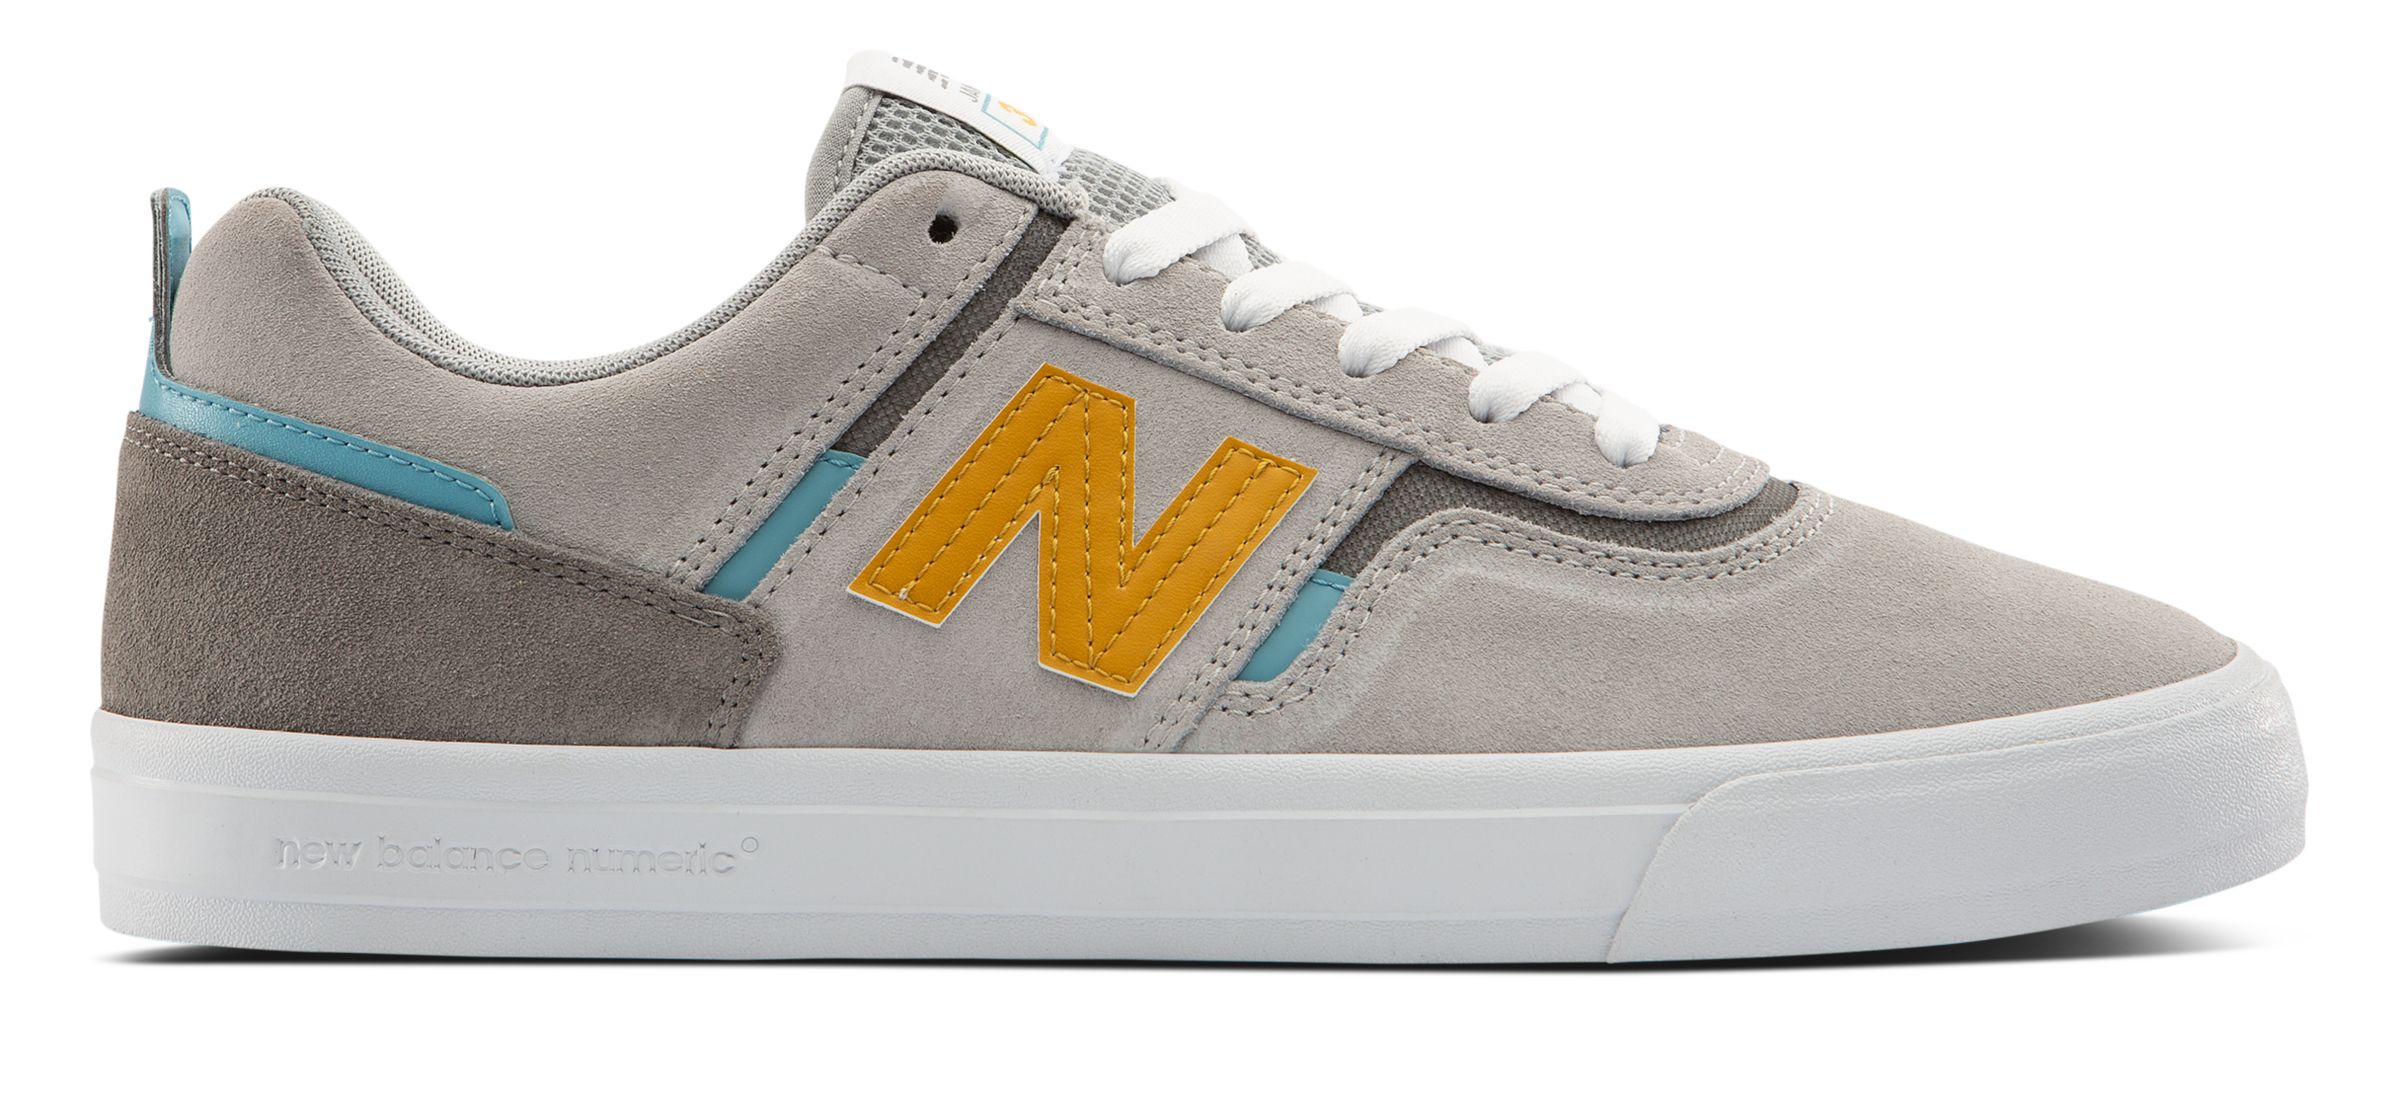 what is new balance numeric